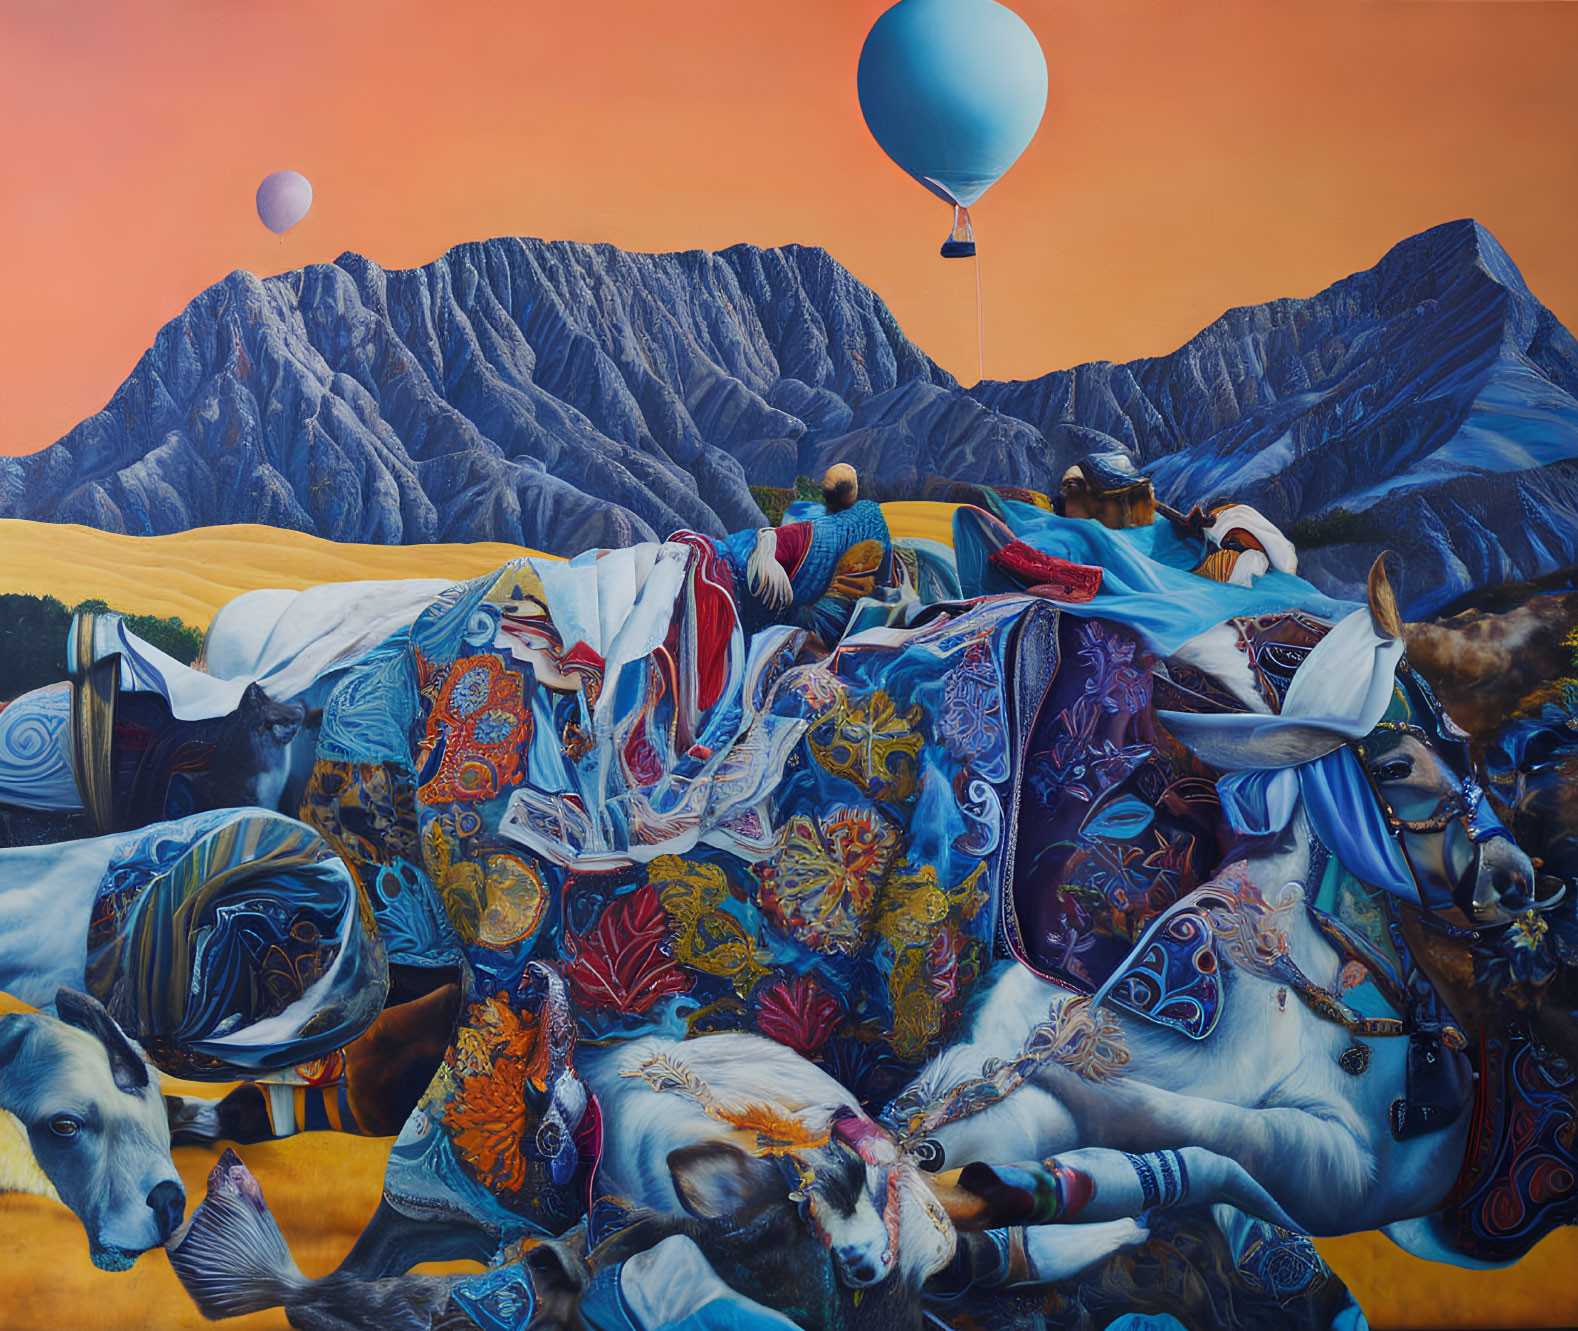 Colorful painting of cows with blankets in mountain landscape and balloon in sky